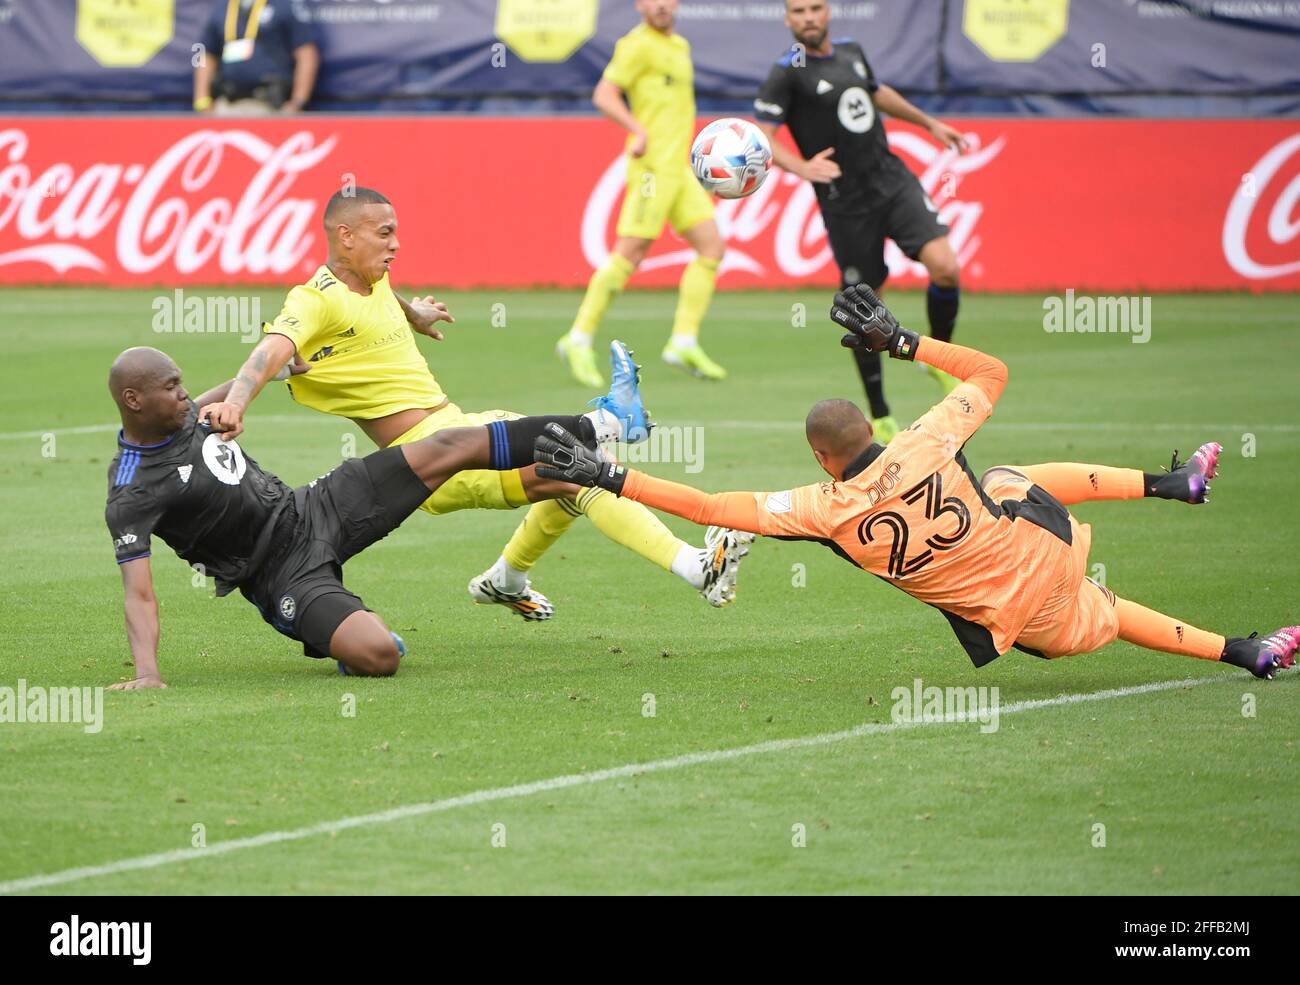 Nashville TN, USA. 24th Apr, 2021. CF MontrŽal defender Zachary Brault-Guillard (15) and CF MontrŽal goalkeeper Clement Diop (23) blocks the shot of Nashville SC forward Jhonder Cadiz (99) during the first half of an MLS game between the FC Montreal and the Nashville SC at Nissan Stadium in Nashville TN. Credit: csm/Alamy Live News Stock Photo